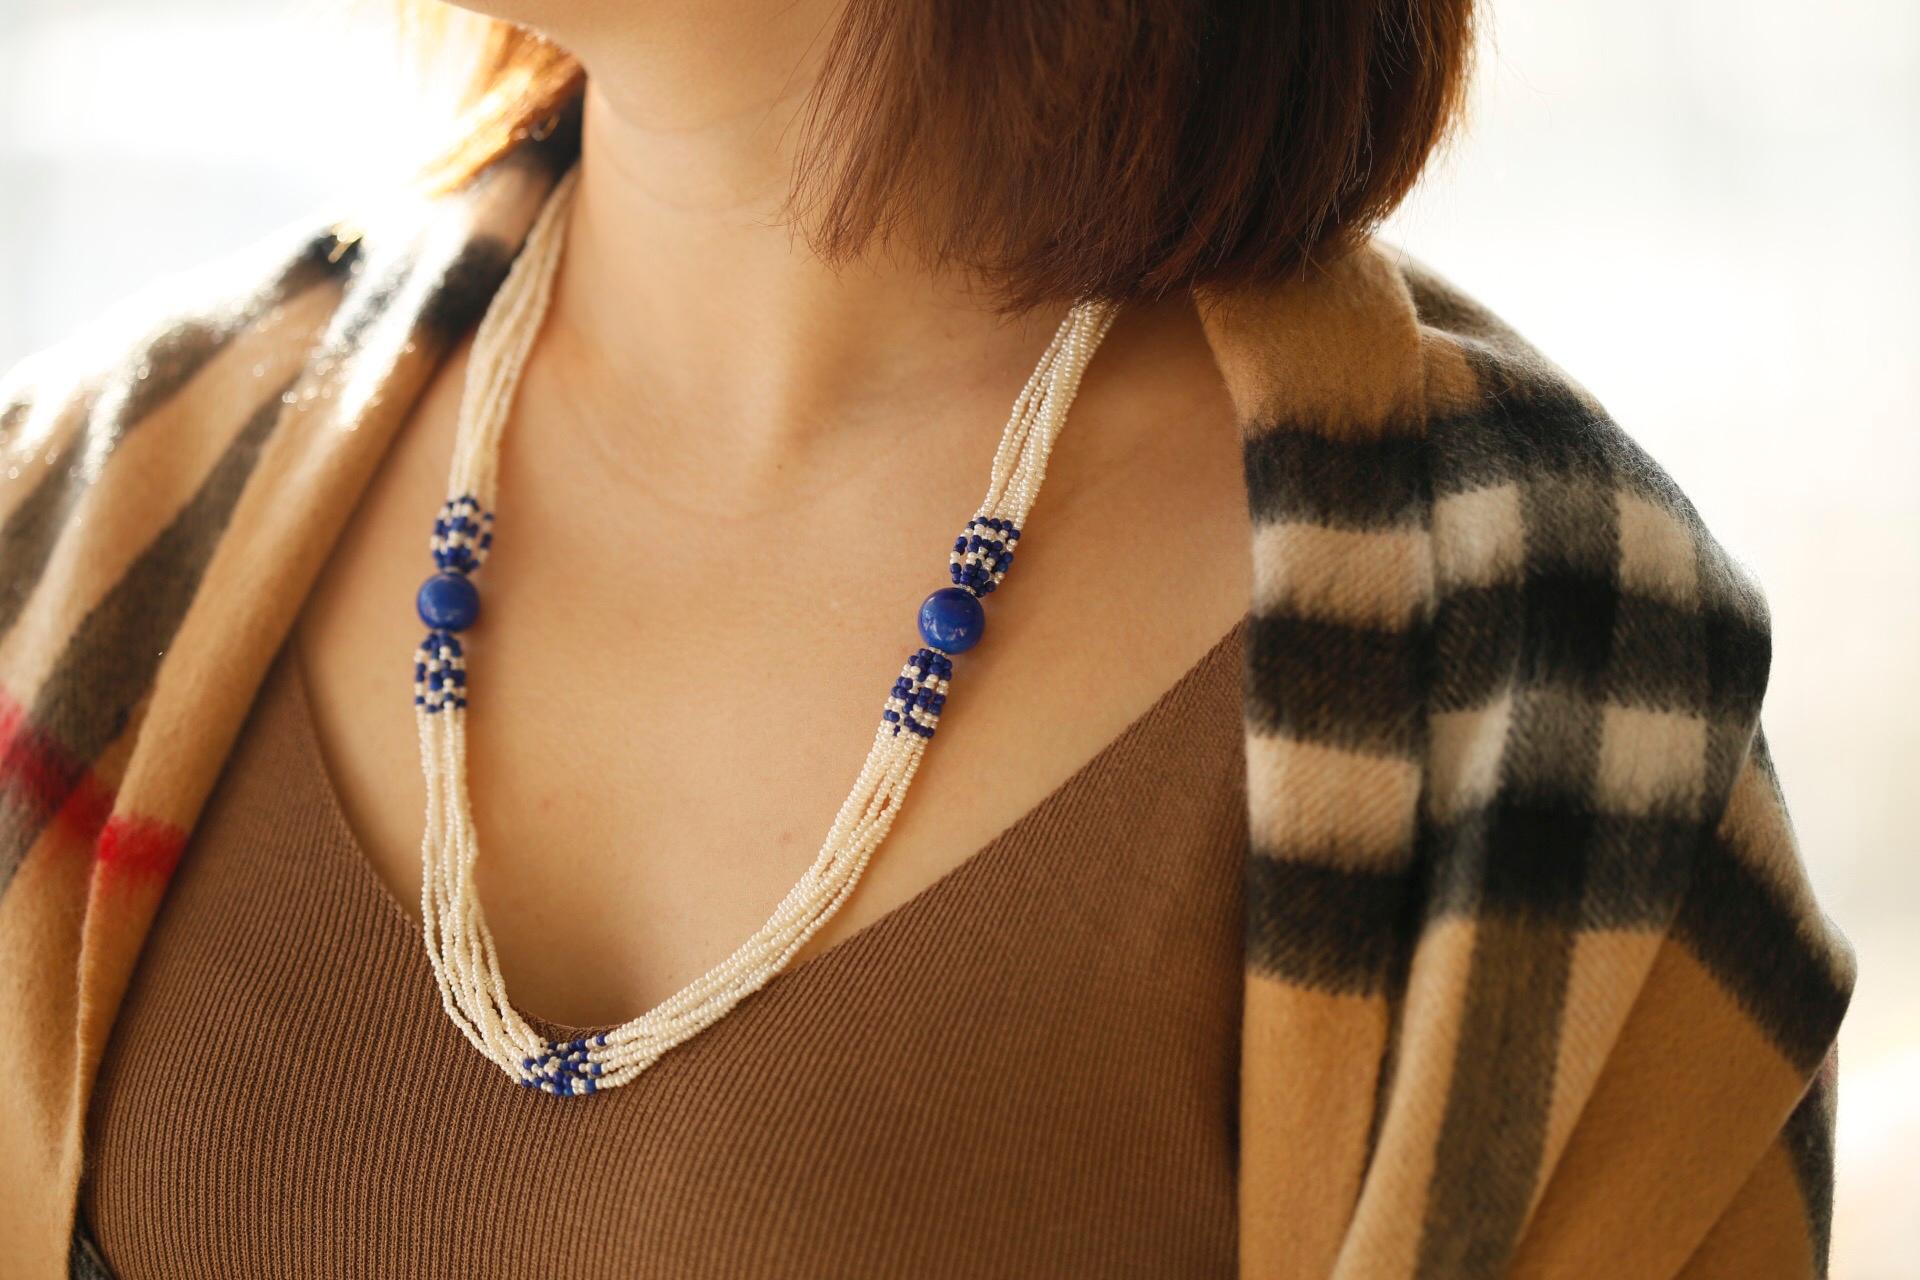 A remarkable lapis lazuli and pearl necklace, enhanced with bright and lively diamonds.

Ropes of delicate pearls gracefully falling amongst one another, mixed with sprays of bright and vivid blue lapis lazuli like a starry night sky. The colour